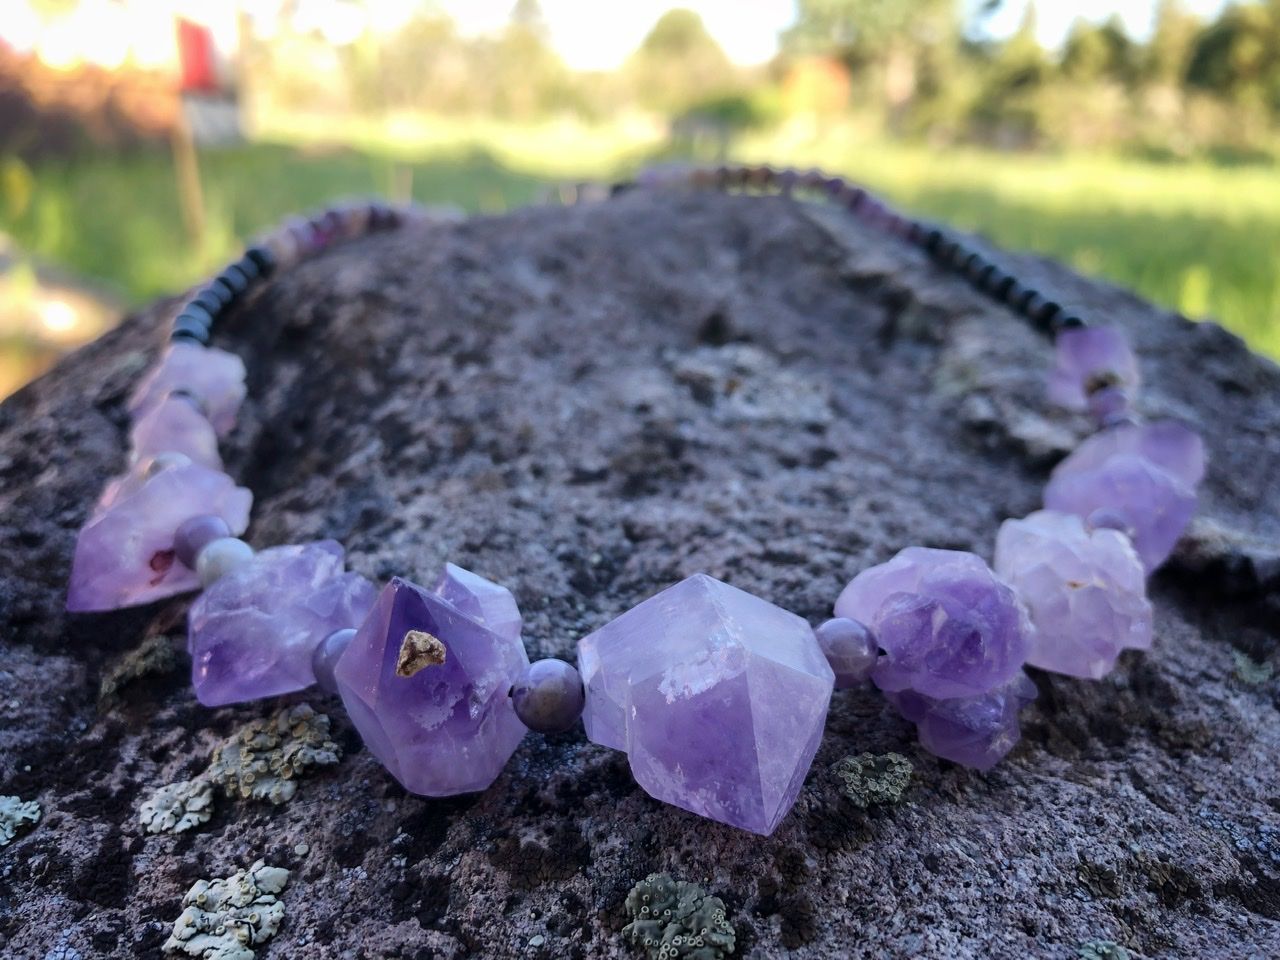 A purple amethyst crystal and black cats eye necklace rests on a lichen covered Boulder